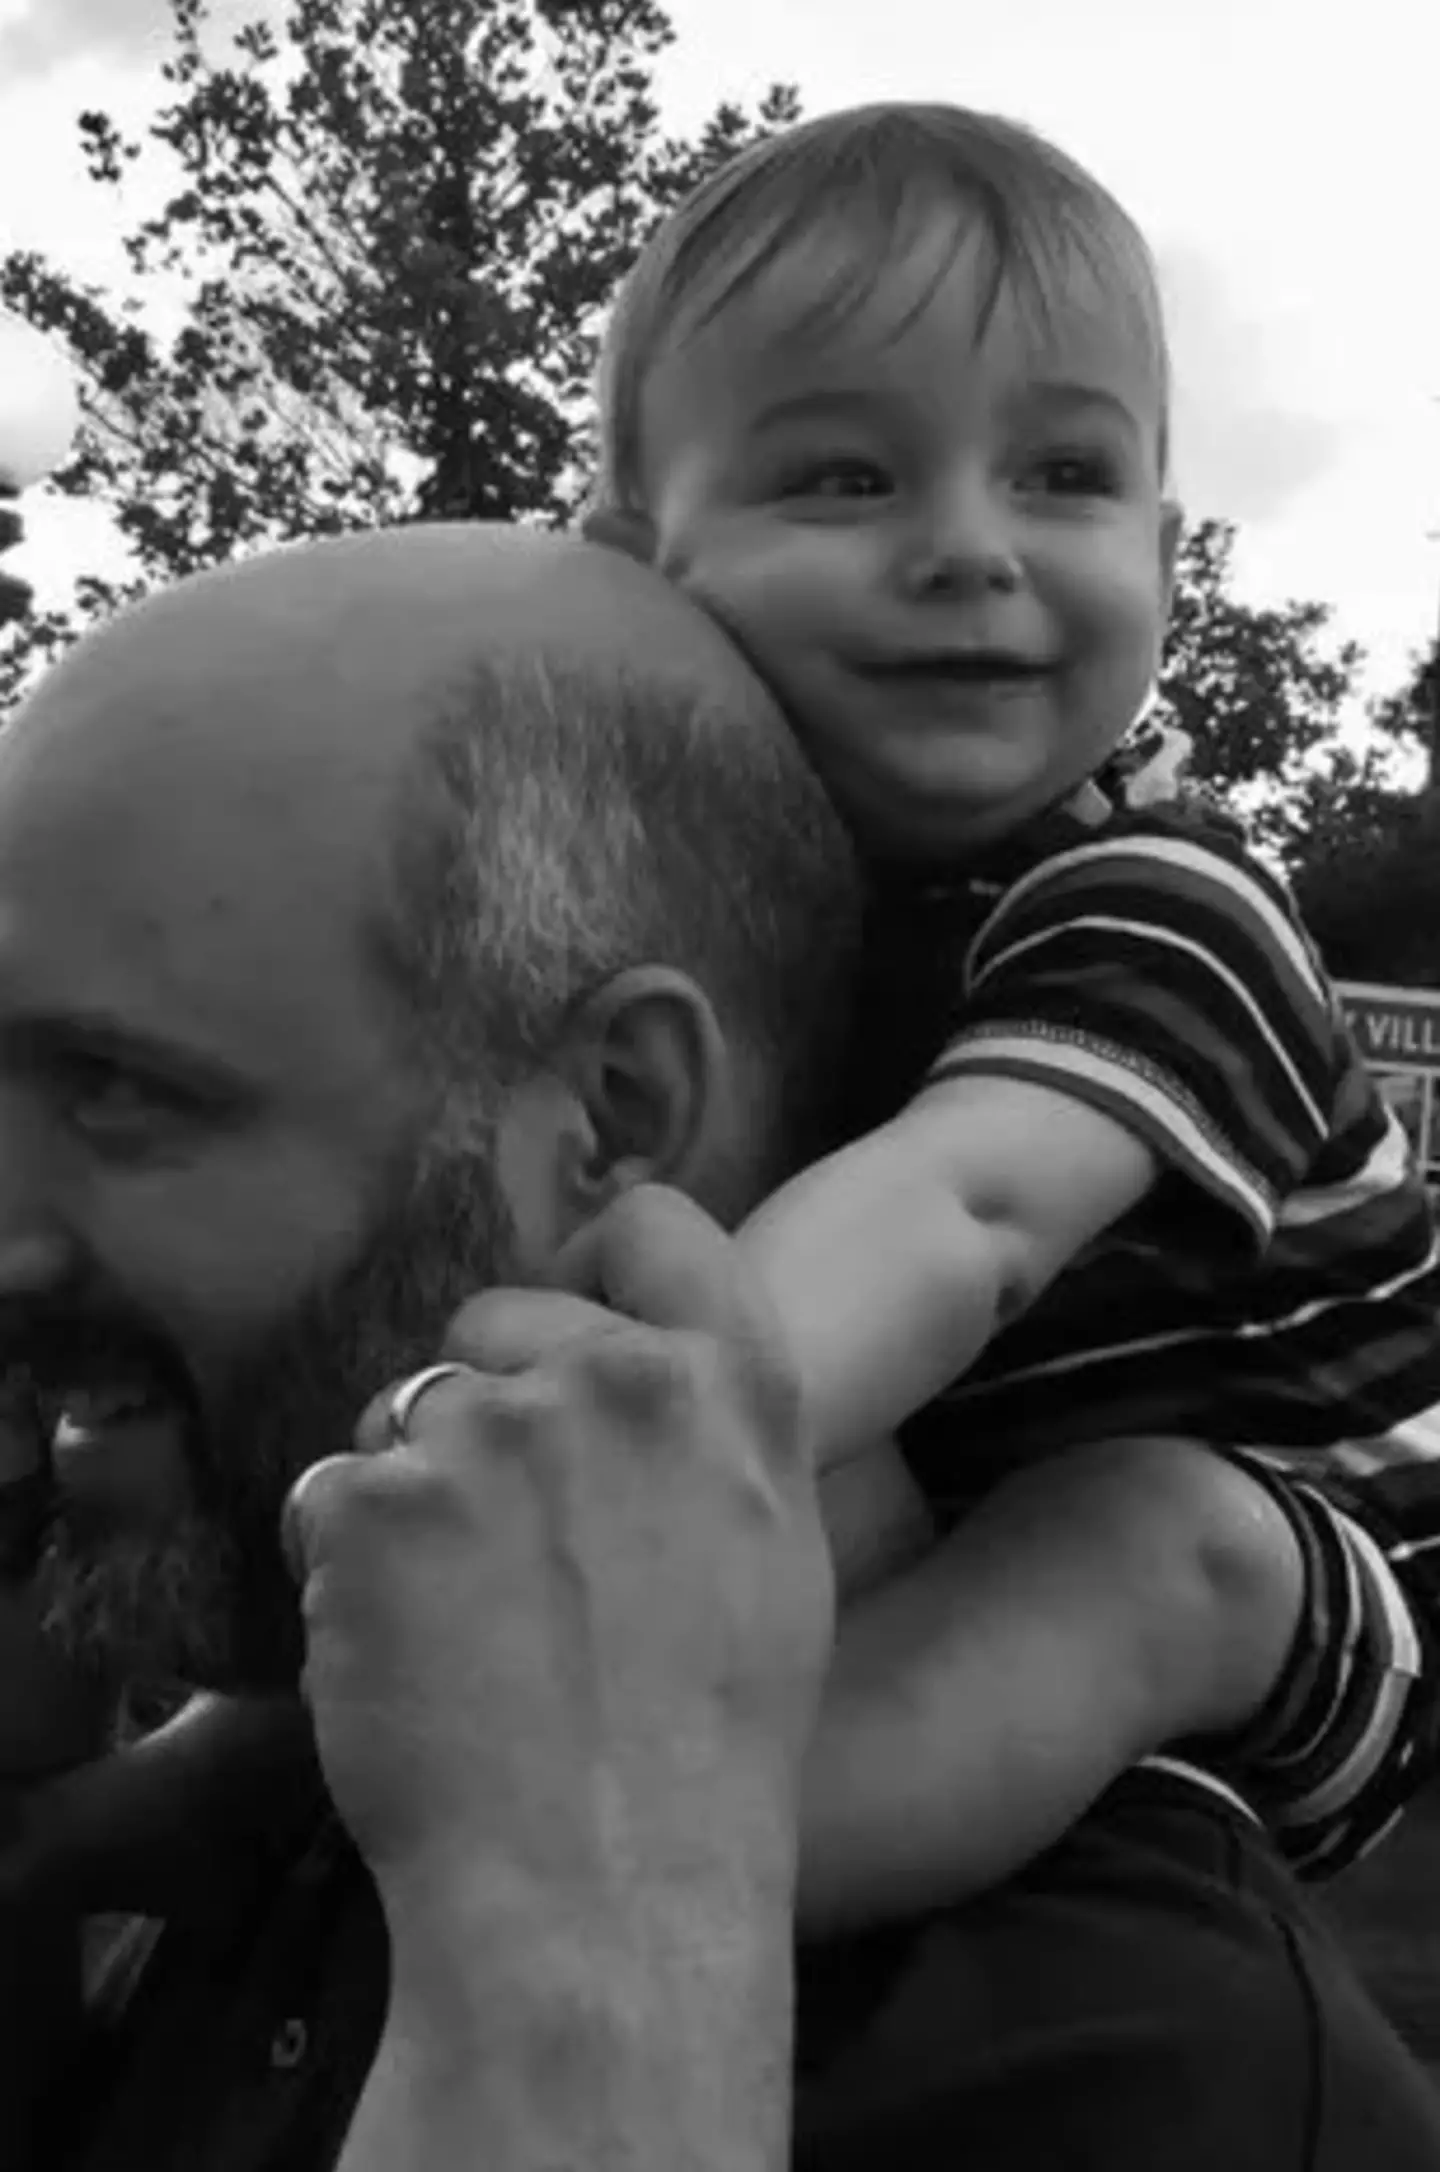 Ethan and his father sadly passed away following the tragic event. (Facebook)